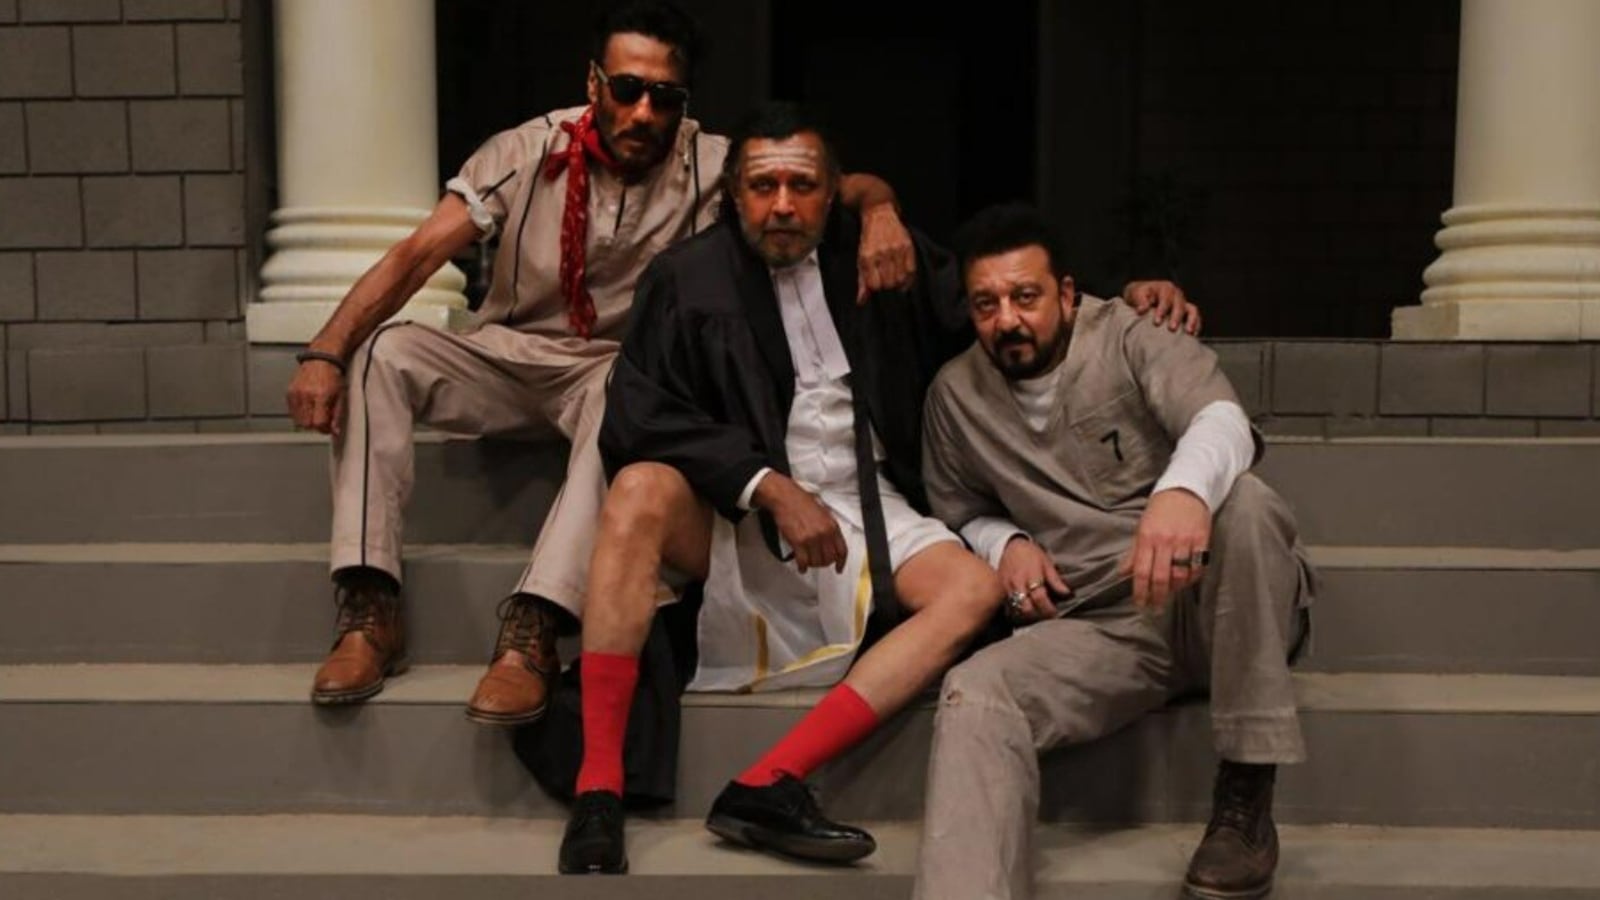 Jackie Shroff, Sanjay Dutt, Mithun Chakraborty start shooting for new action film Baap, fans get 90s vibes